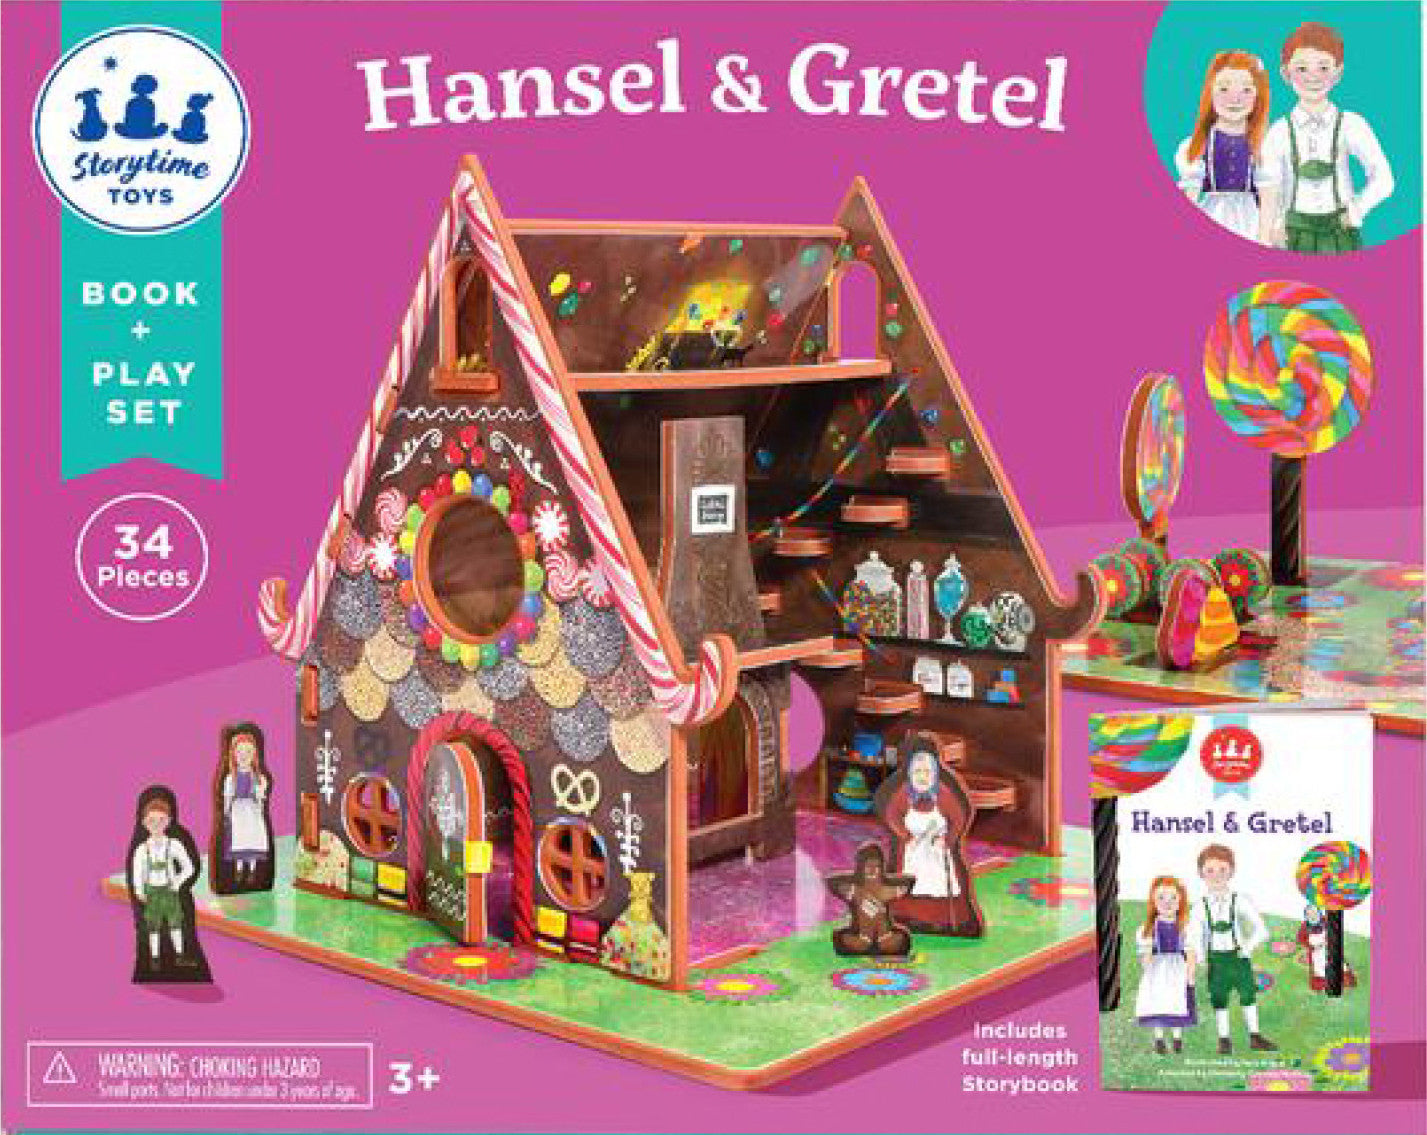 Book and Play Set: Hansel and Gretel